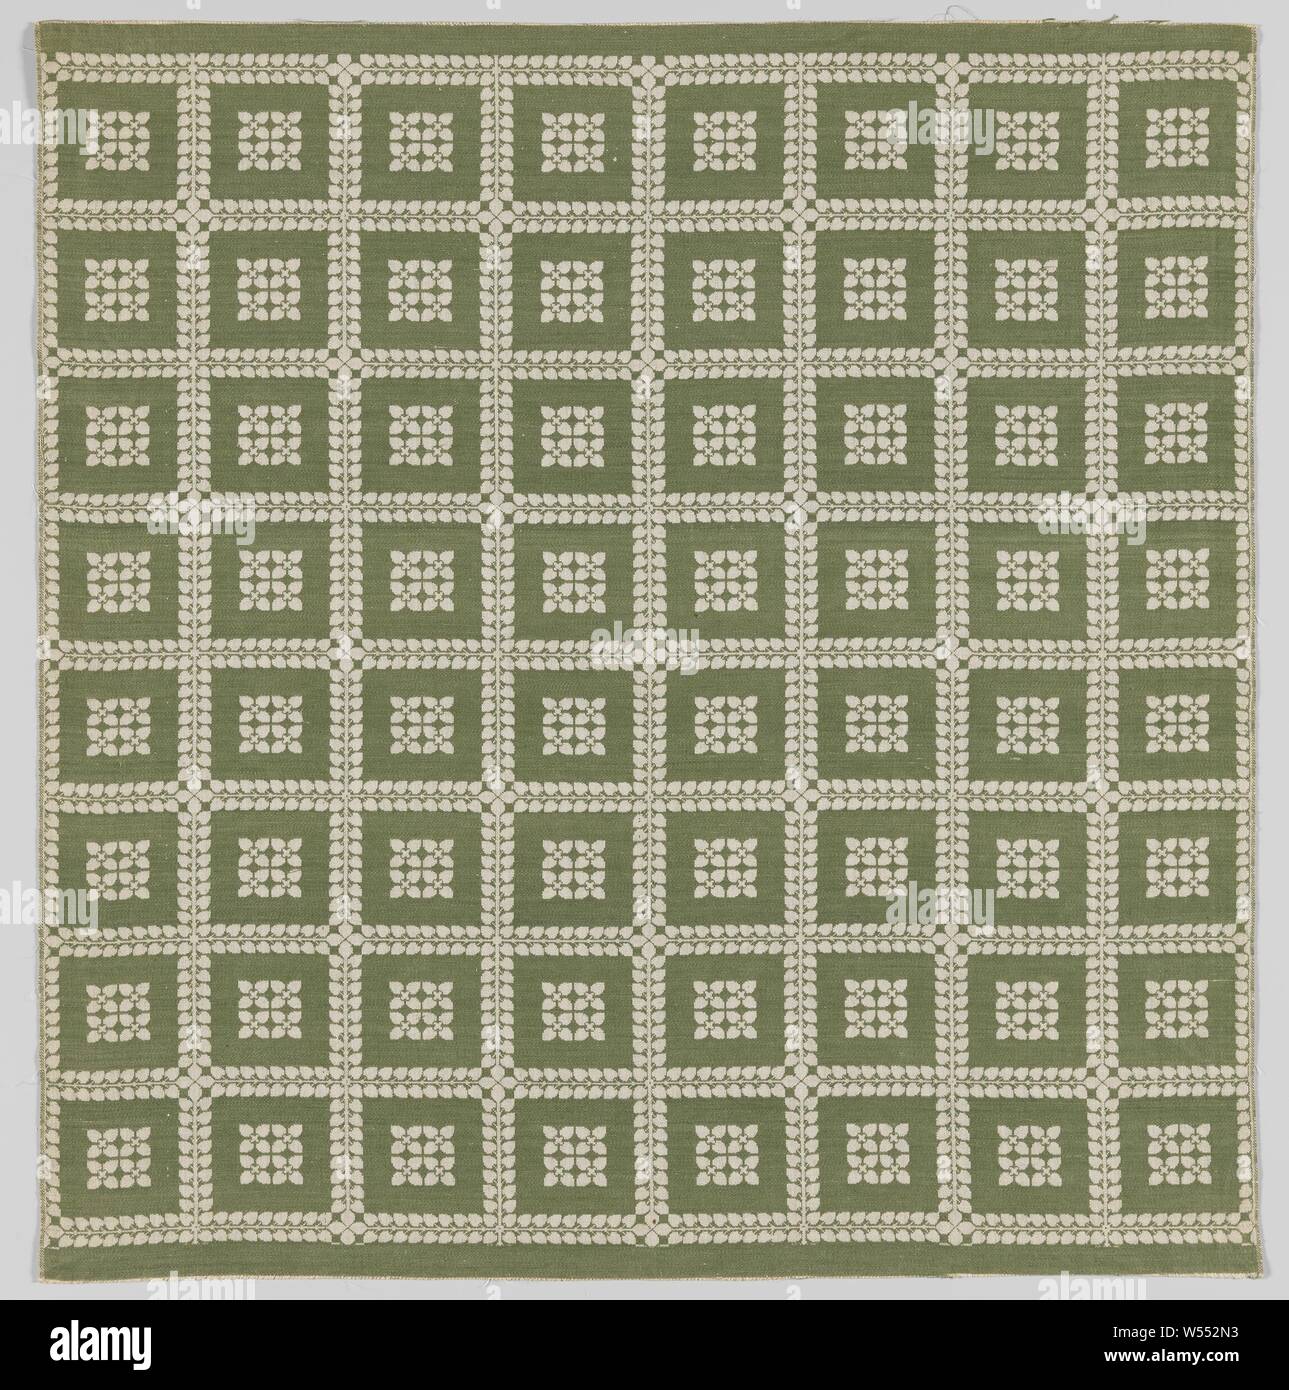 Steel mesh fabric from linen damask with diamond pattern of leaf vines, Steel fabric from linen damask with diamond pattern from leaf vines, inside which four flowers, in natural on a green ground., Chris Lebeau, Eindhoven, 1911 - 1915, linen (material), damask, h 58.5 cm × w 61.0 cm Stock Photo